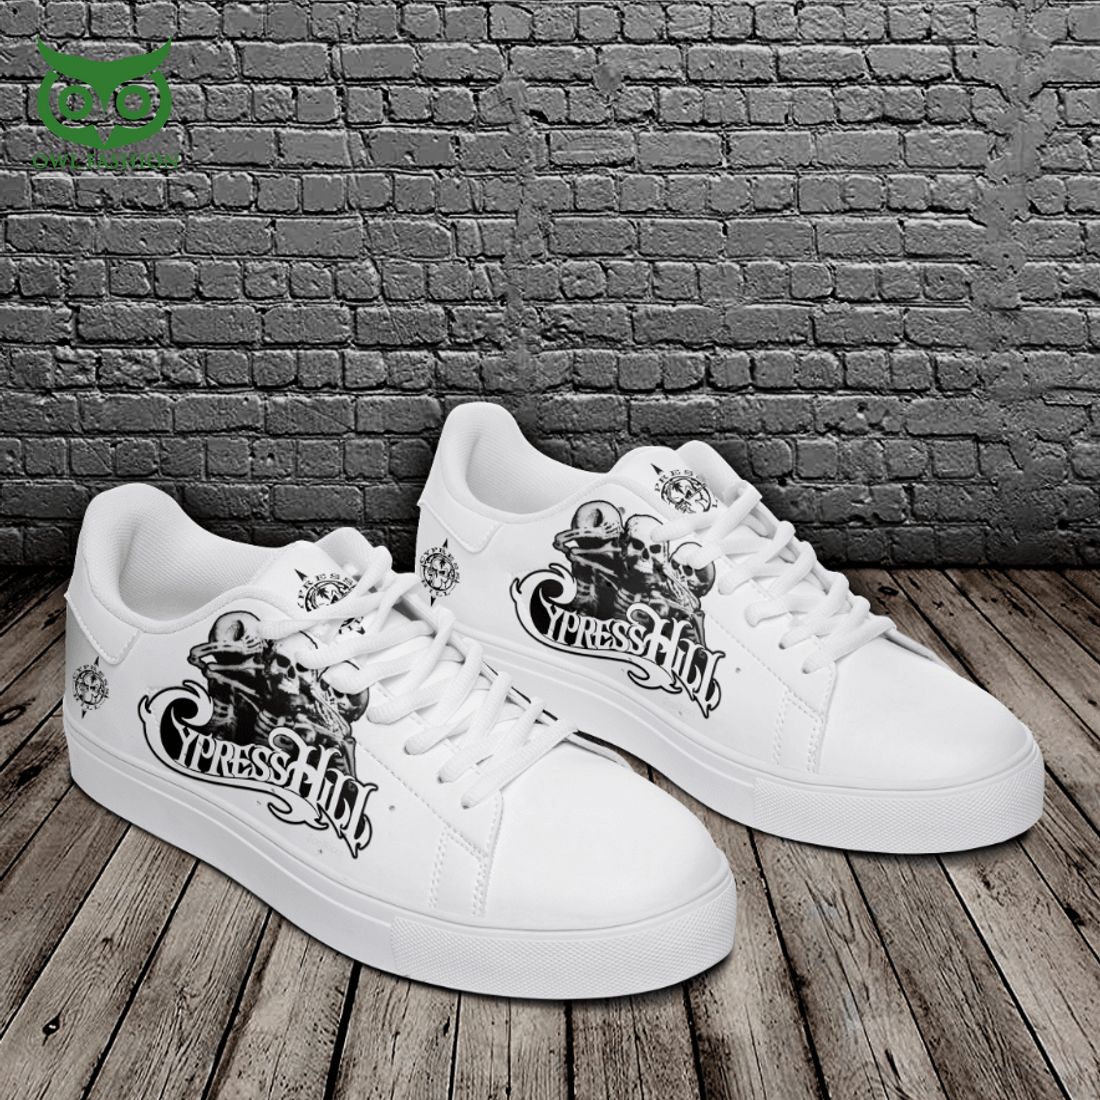 cypress hill skull white 3d printed stan smith shoes 2 vHyD9